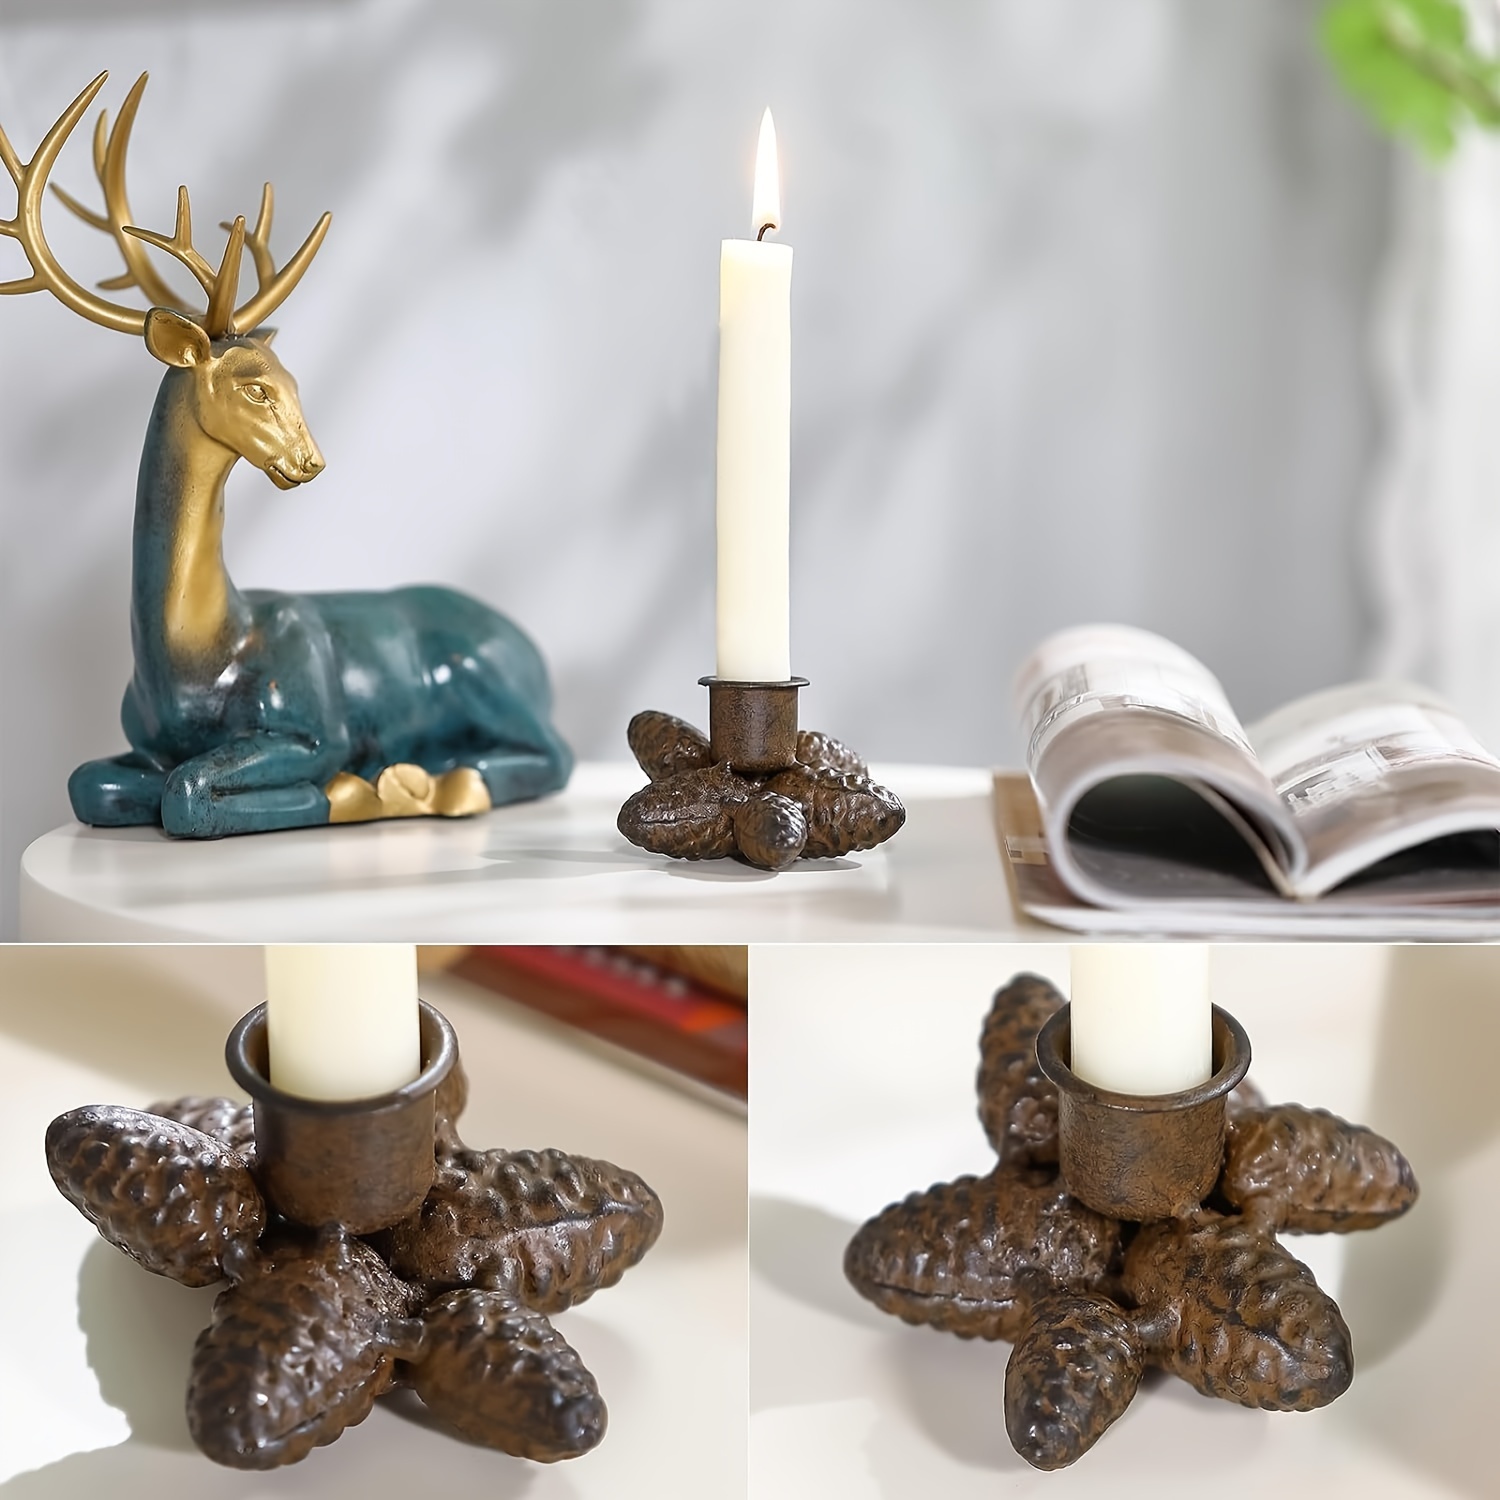 2pcs/set Metal Candlestick Holders, Rustic Pinecone Taper Candle Holders,  Pine Cone And Bell Decorative Candle Sticks Holder For Dining Room Table Wed